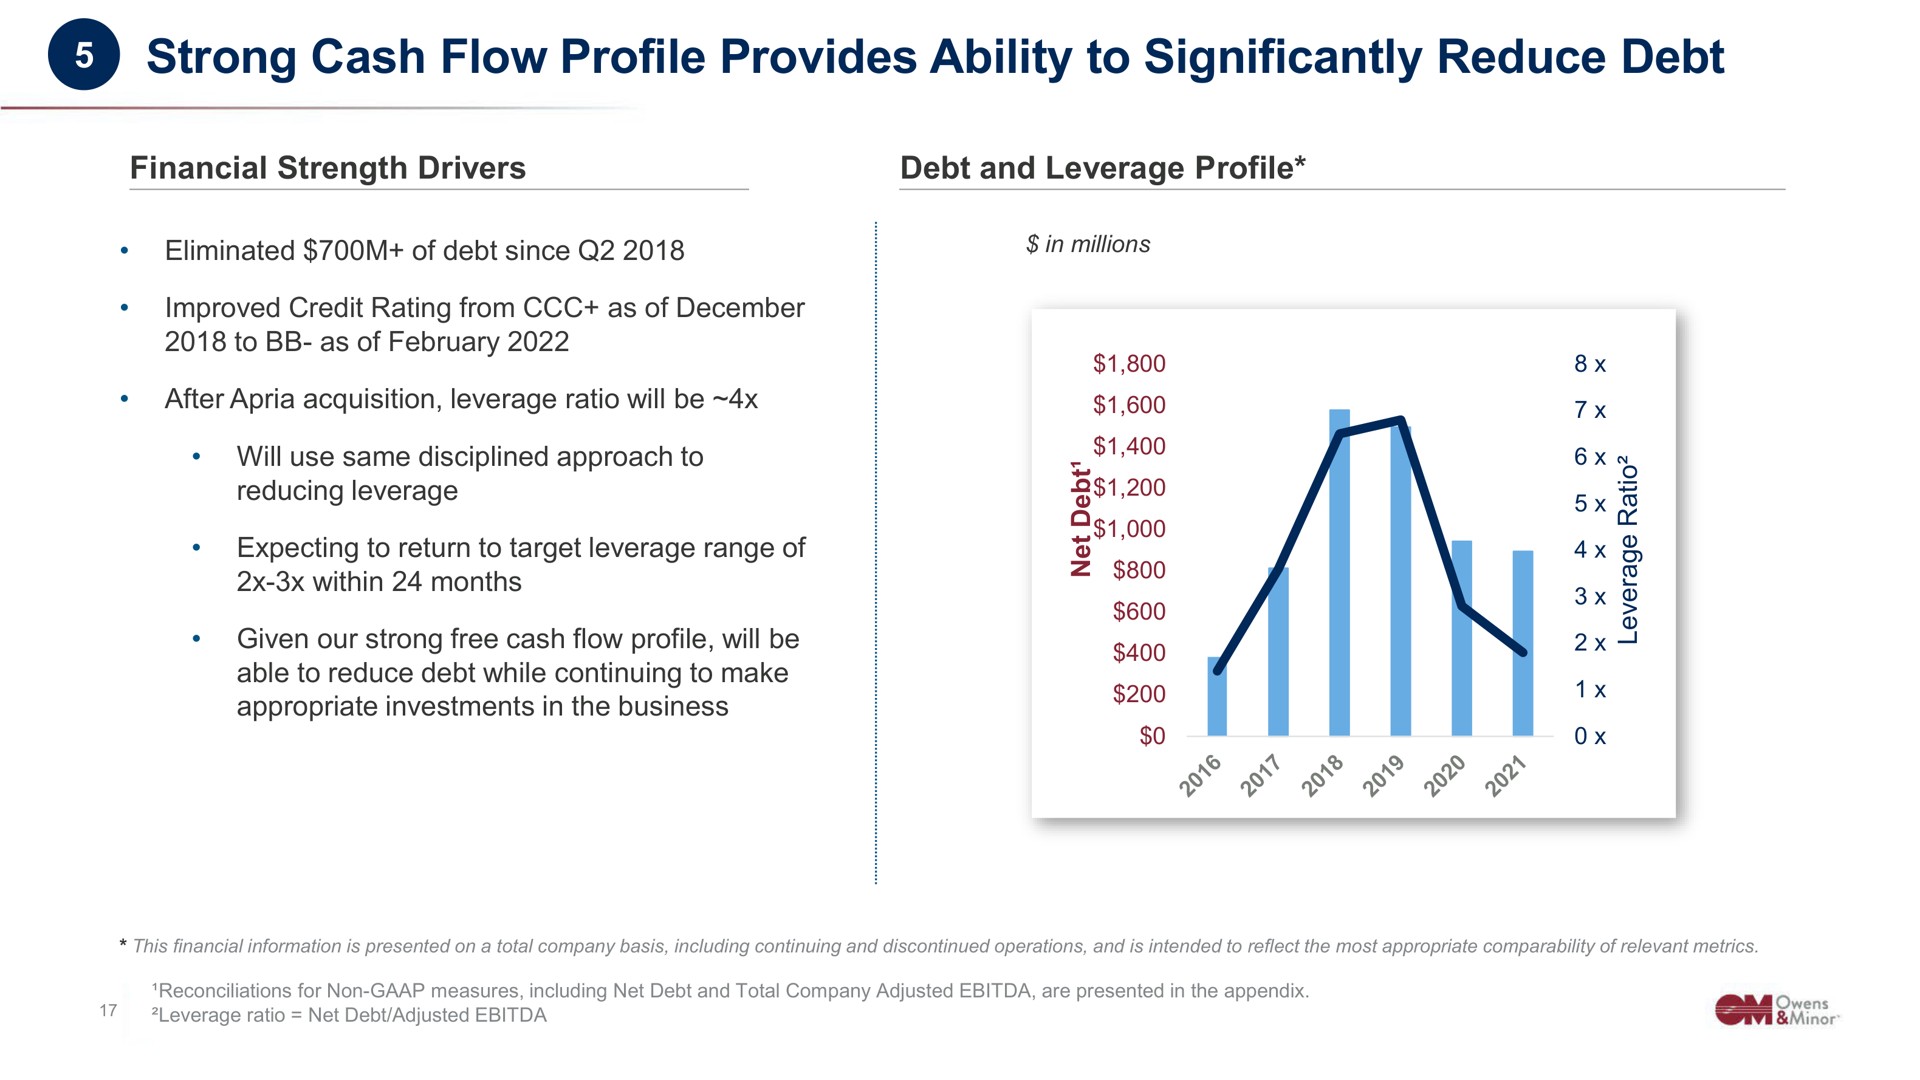 strong cash flow profile provides ability to significantly reduce debt eliminated of since in millions | Owens&Minor